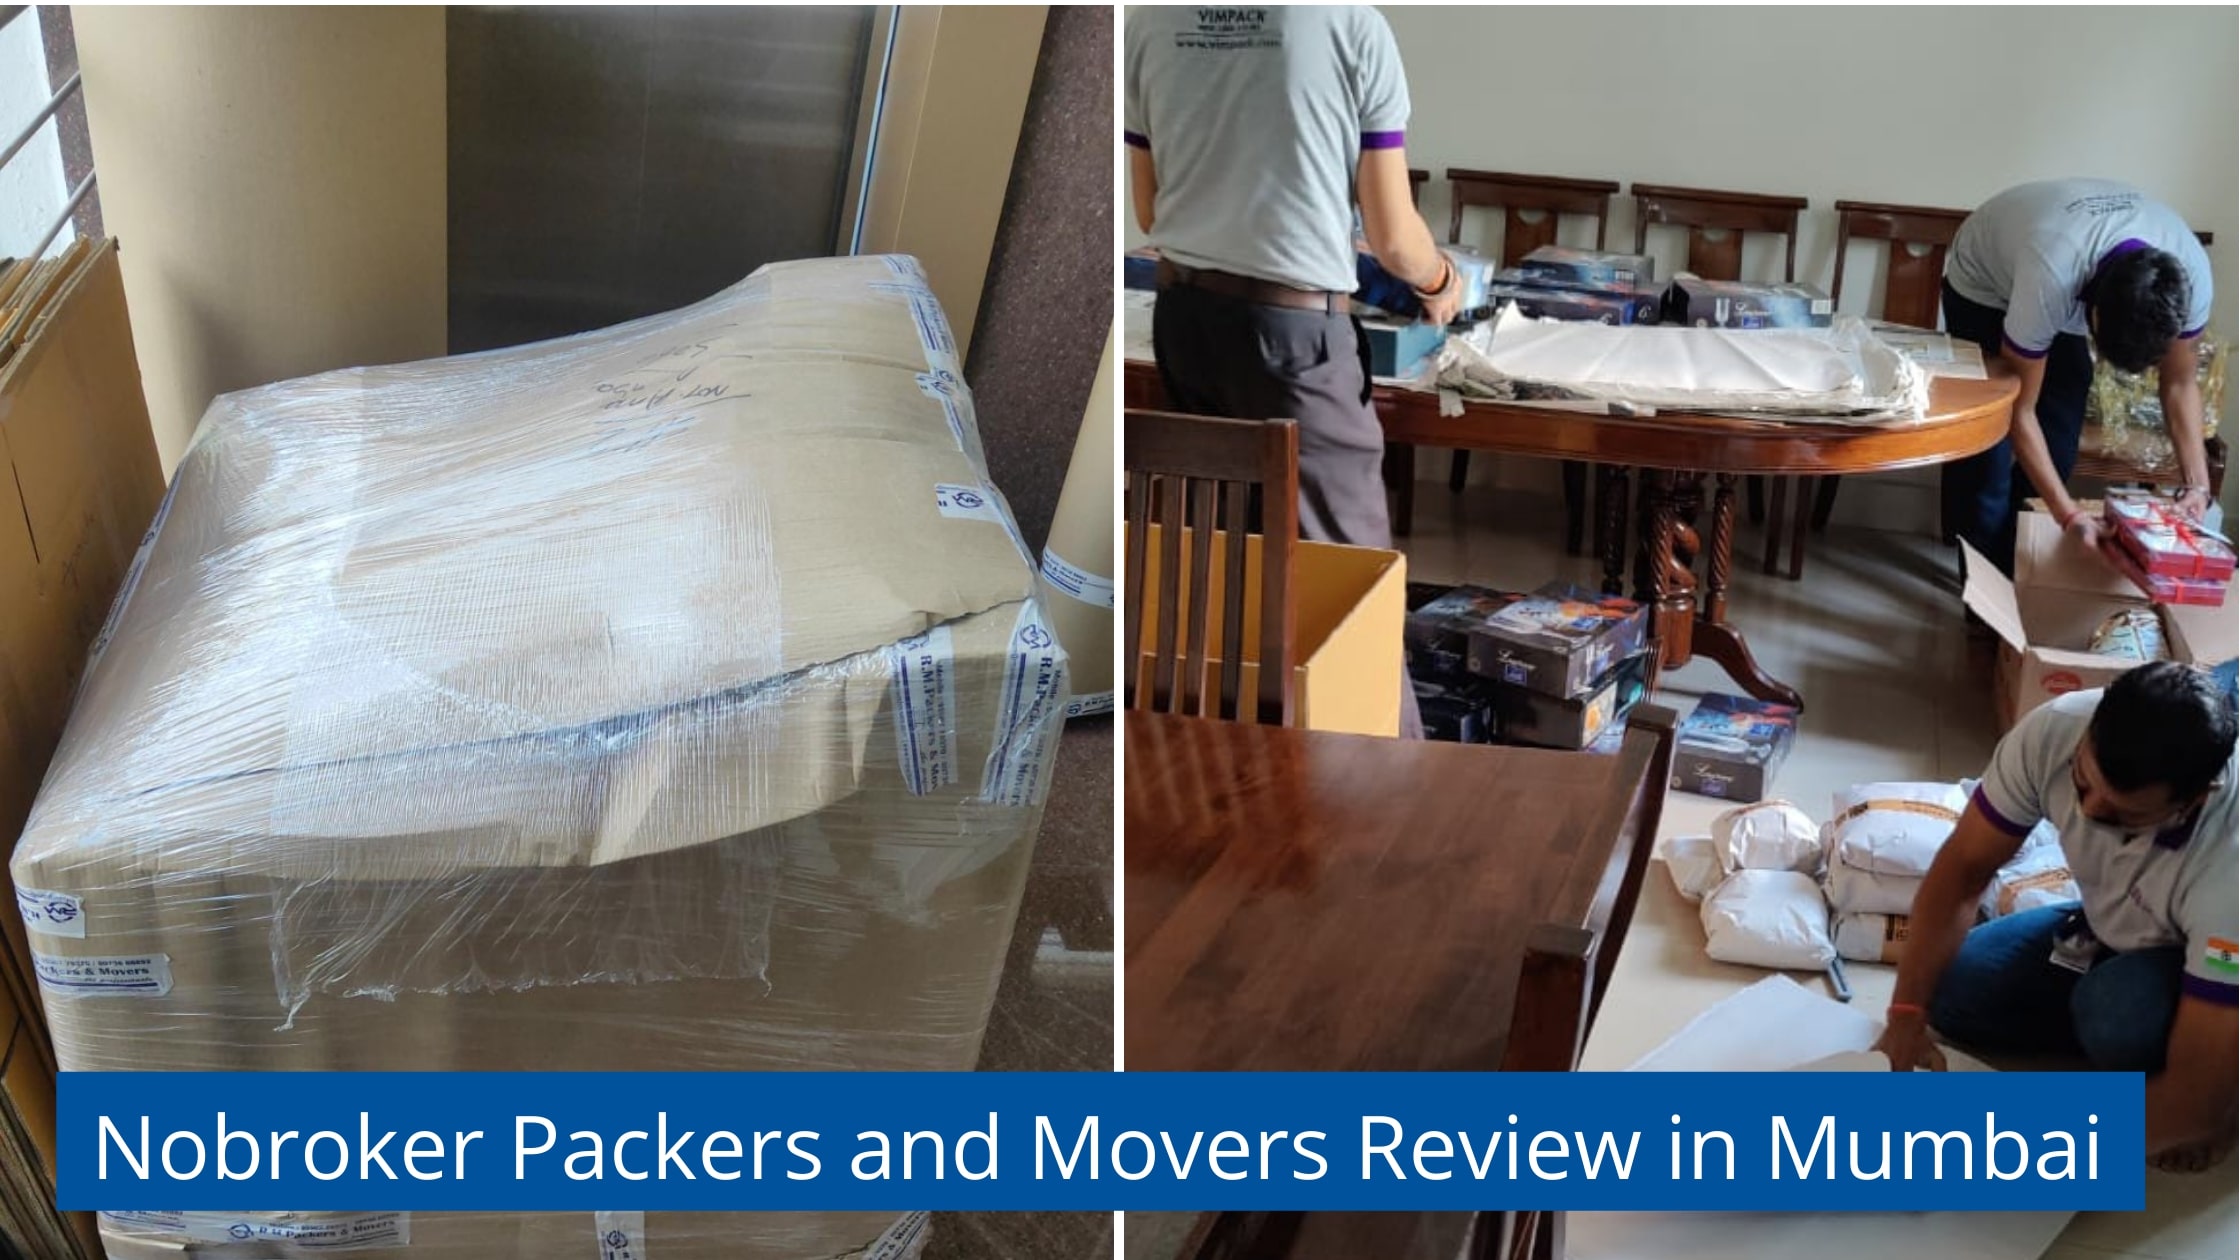 Nobroker Packers and Movers Review in Mumbai